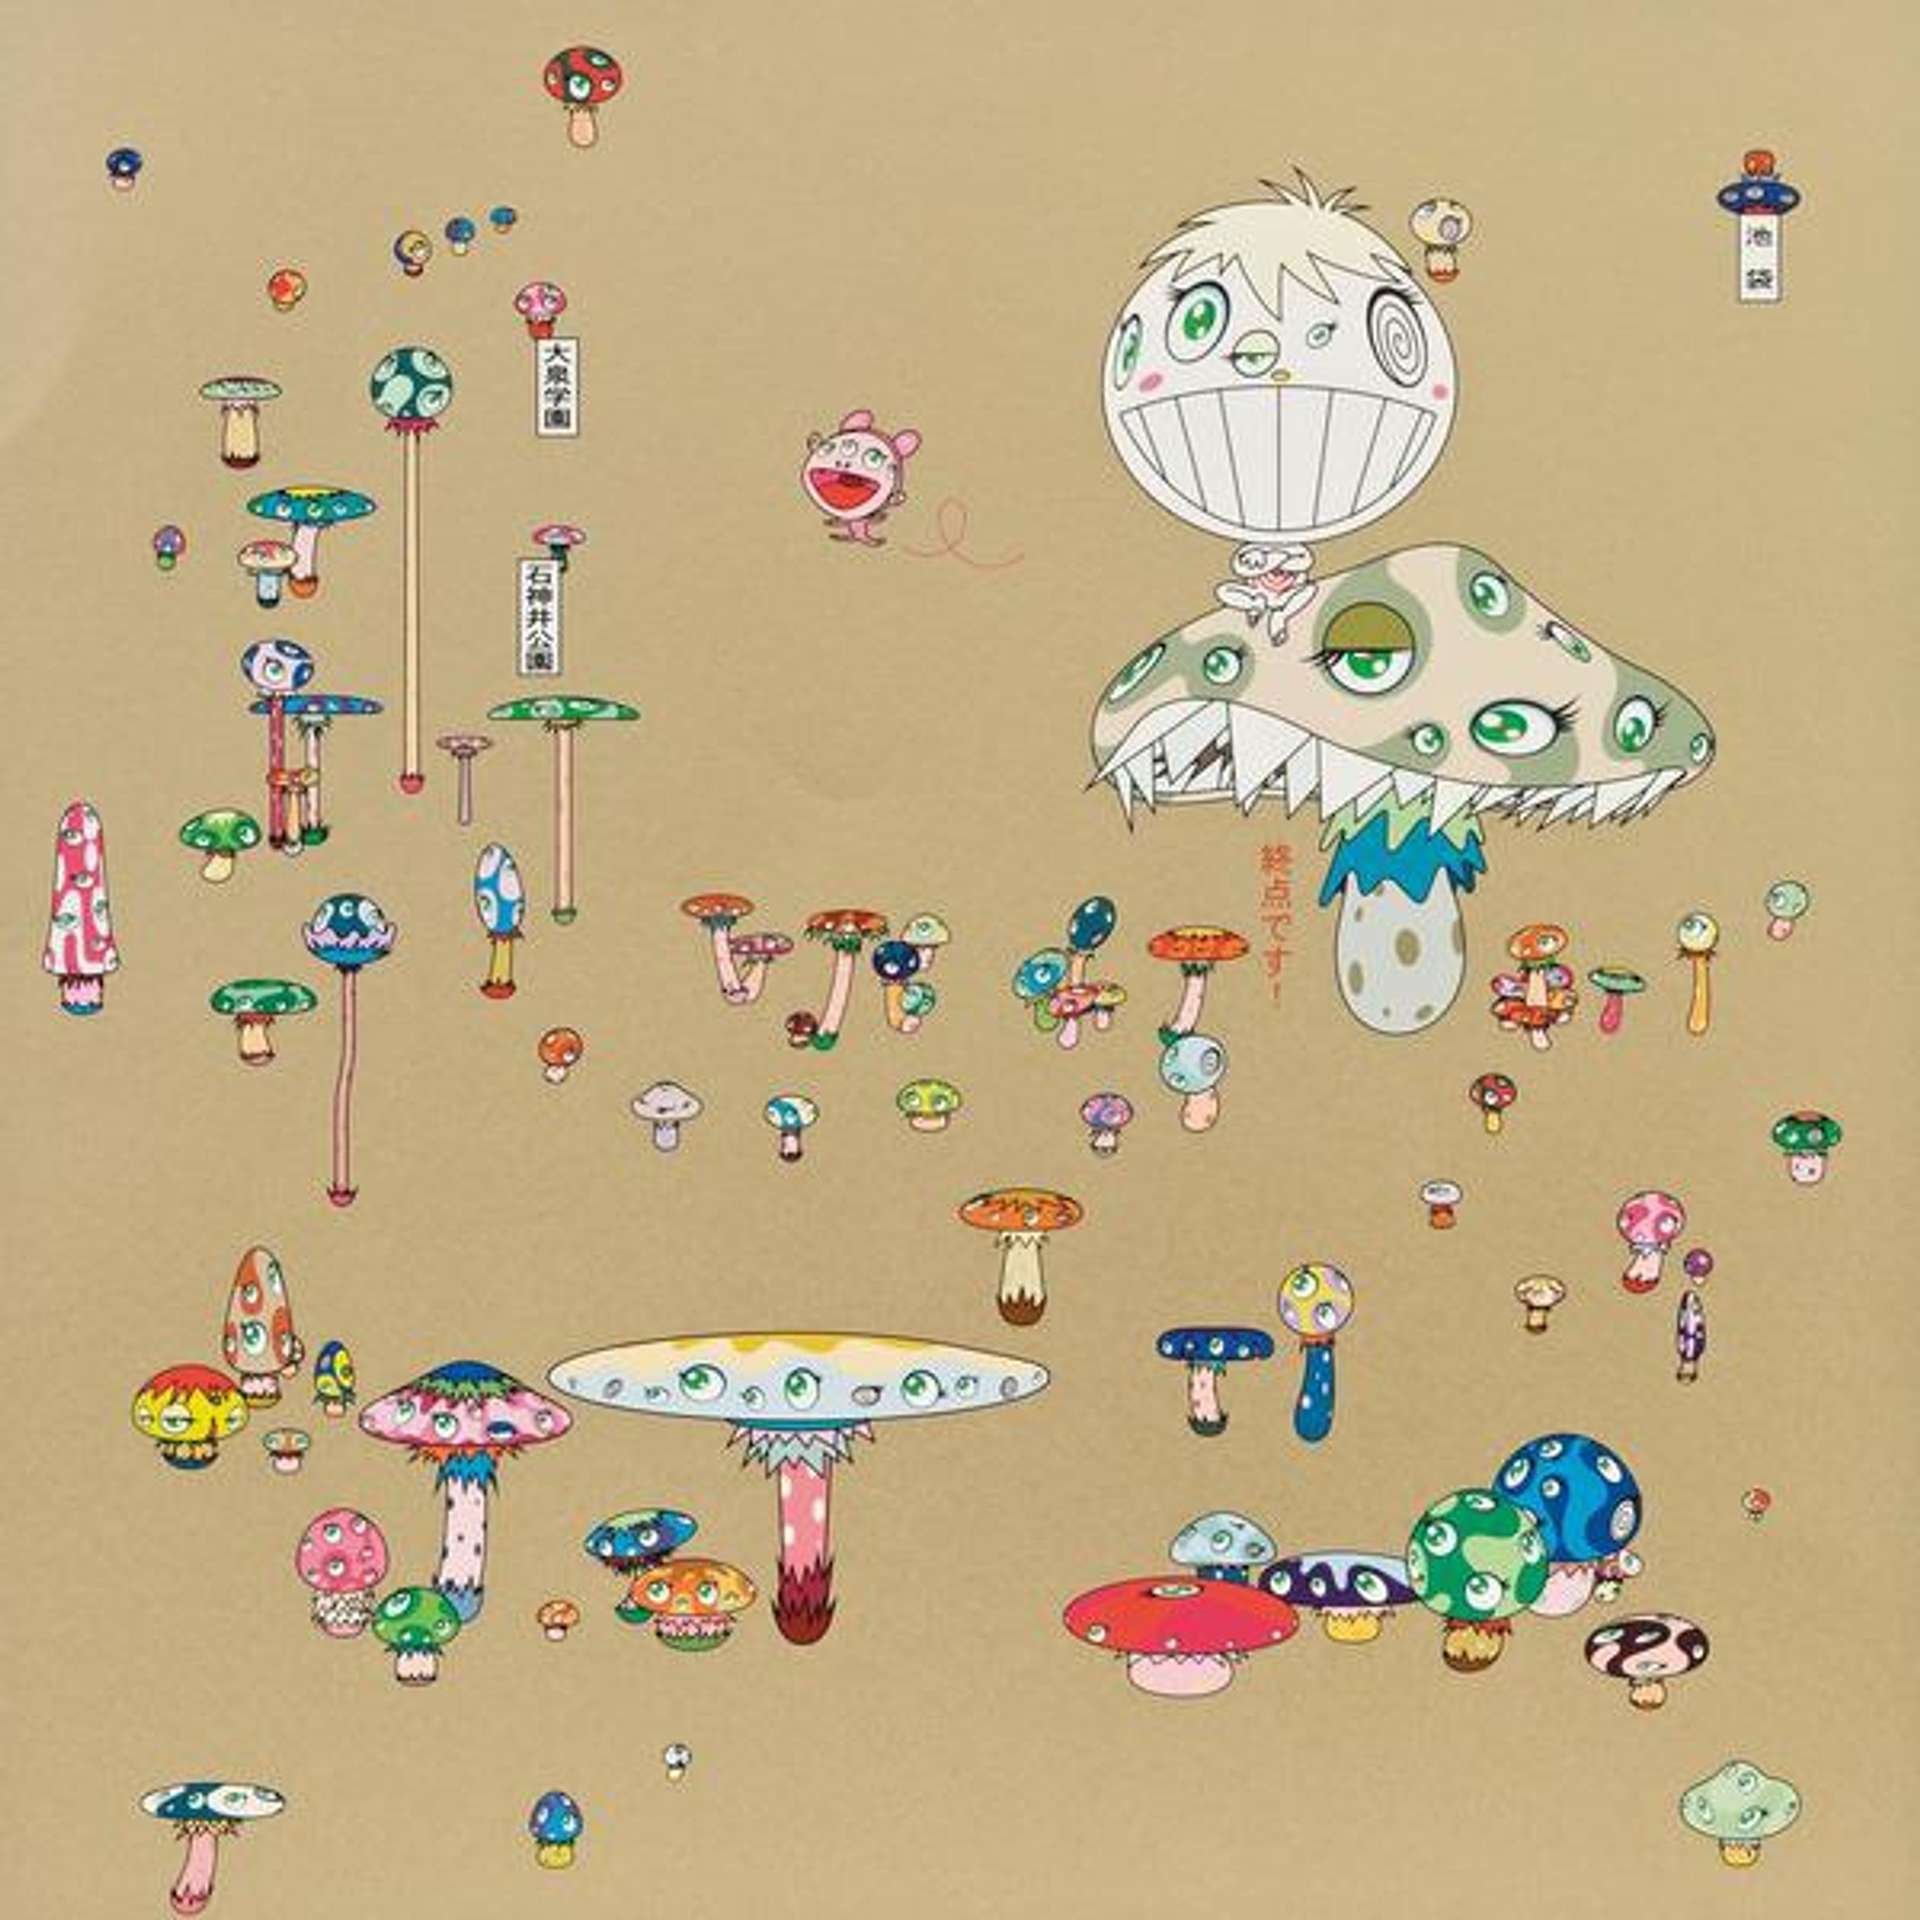 Making A U-Turn, The Lost Child Finds His Way Home - Signed Print by Takashi Murakami 2005 - MyArtBroker